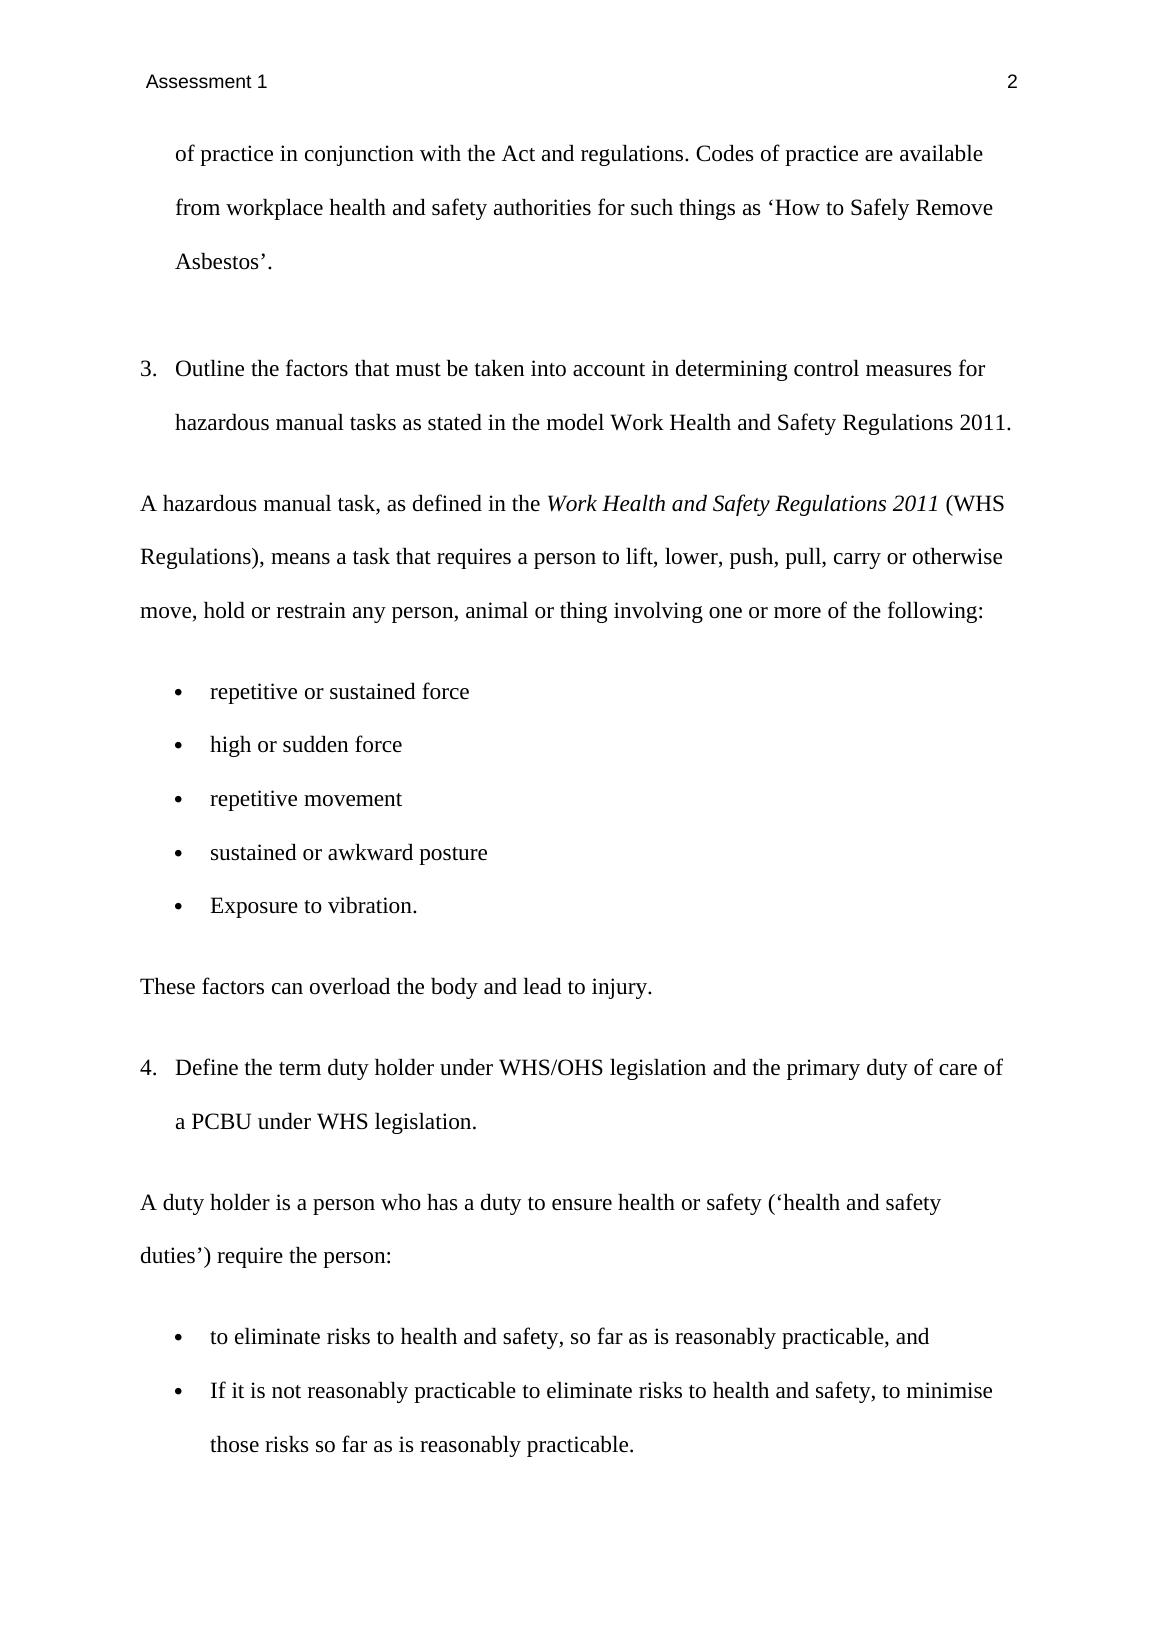 Work Health and Safety Laws Doc_2